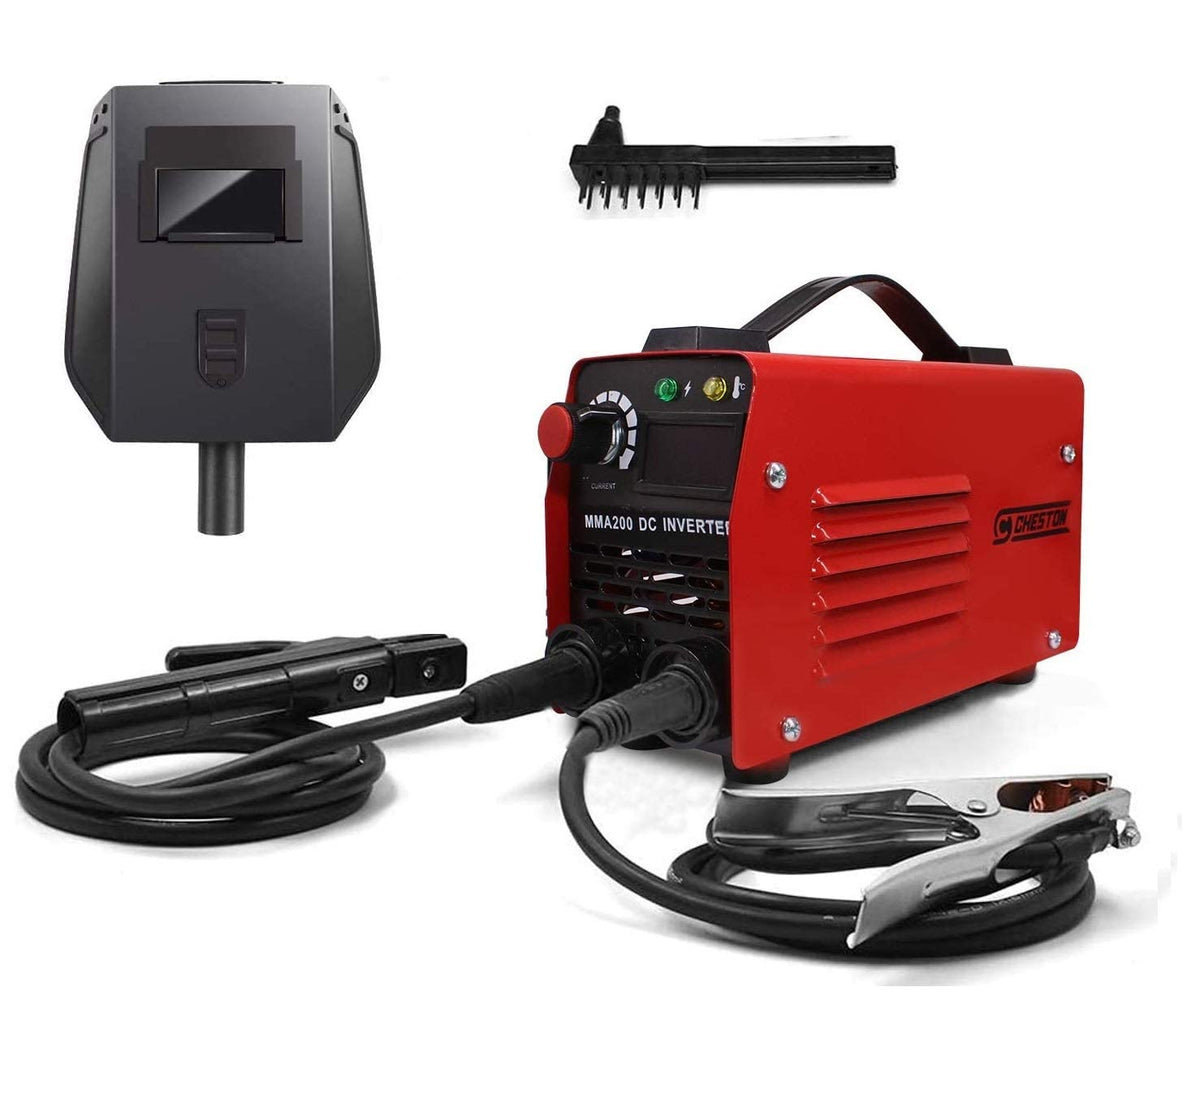 Cheston 200A Portable Inverter Auto ARC/MMA Stick Compact Welding Machine | IGBT Technology & Digital Display | Hot Start & Anti-Stick Function | With Accessories & Face Sheild